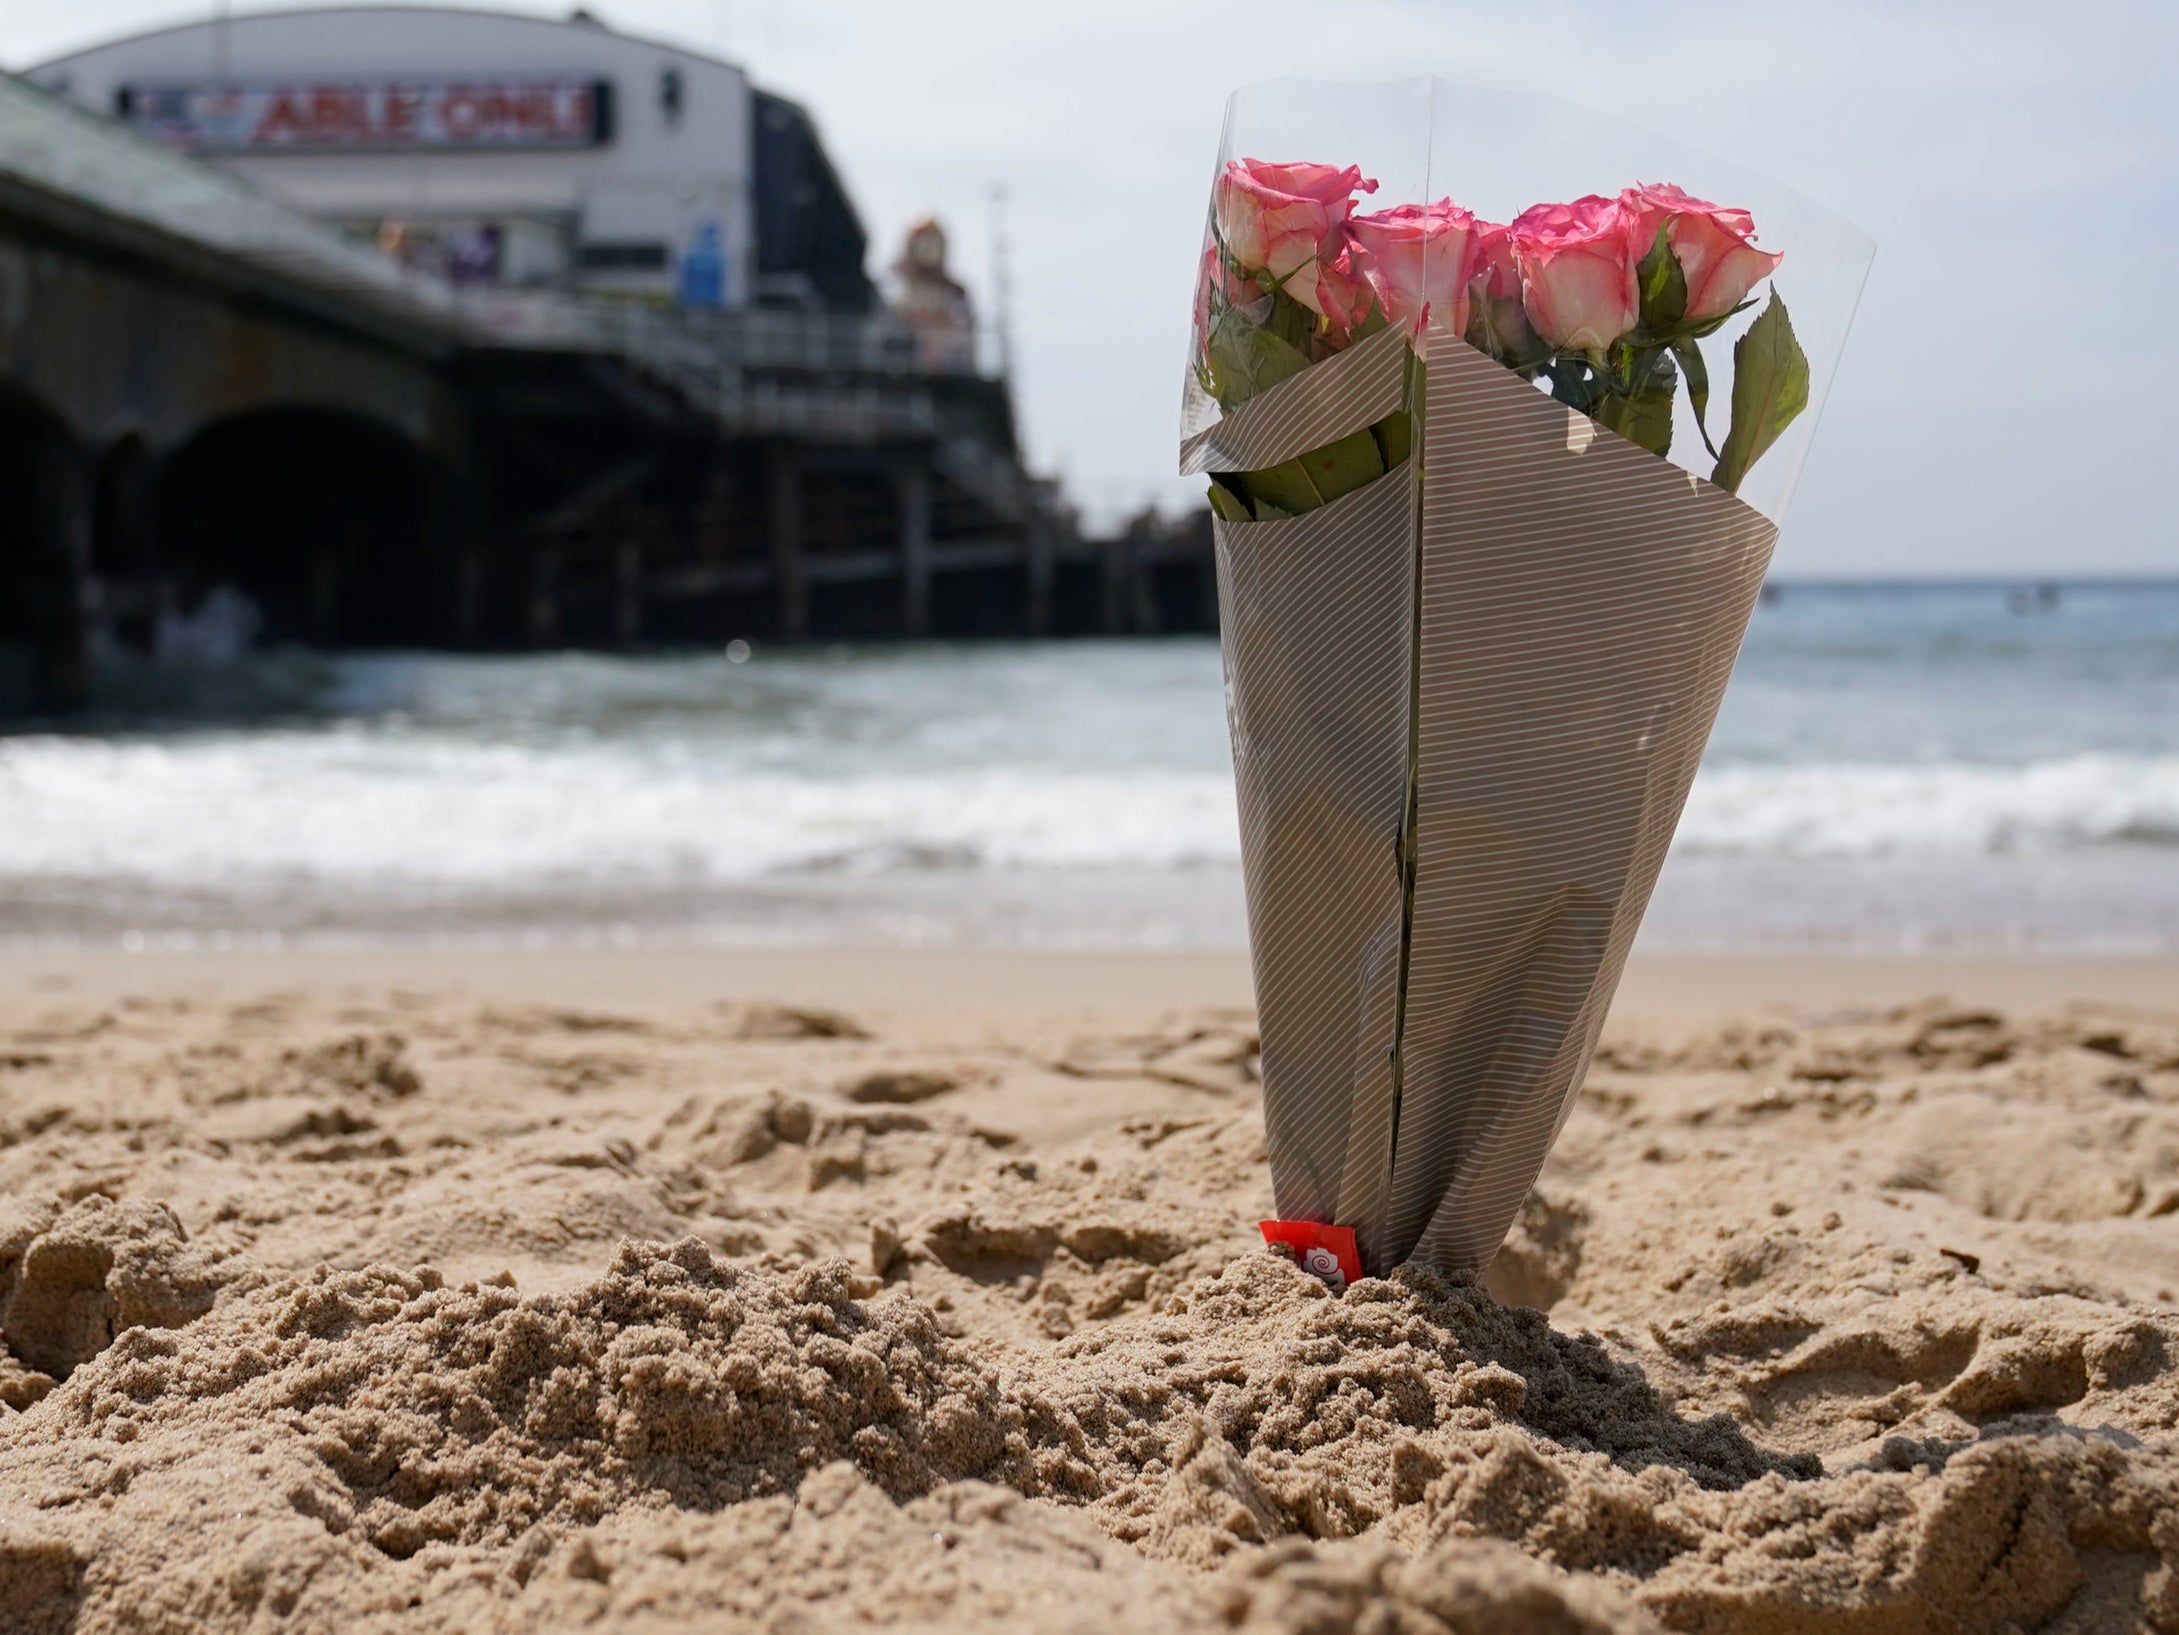 Flowers left on the beach following the double tragedy